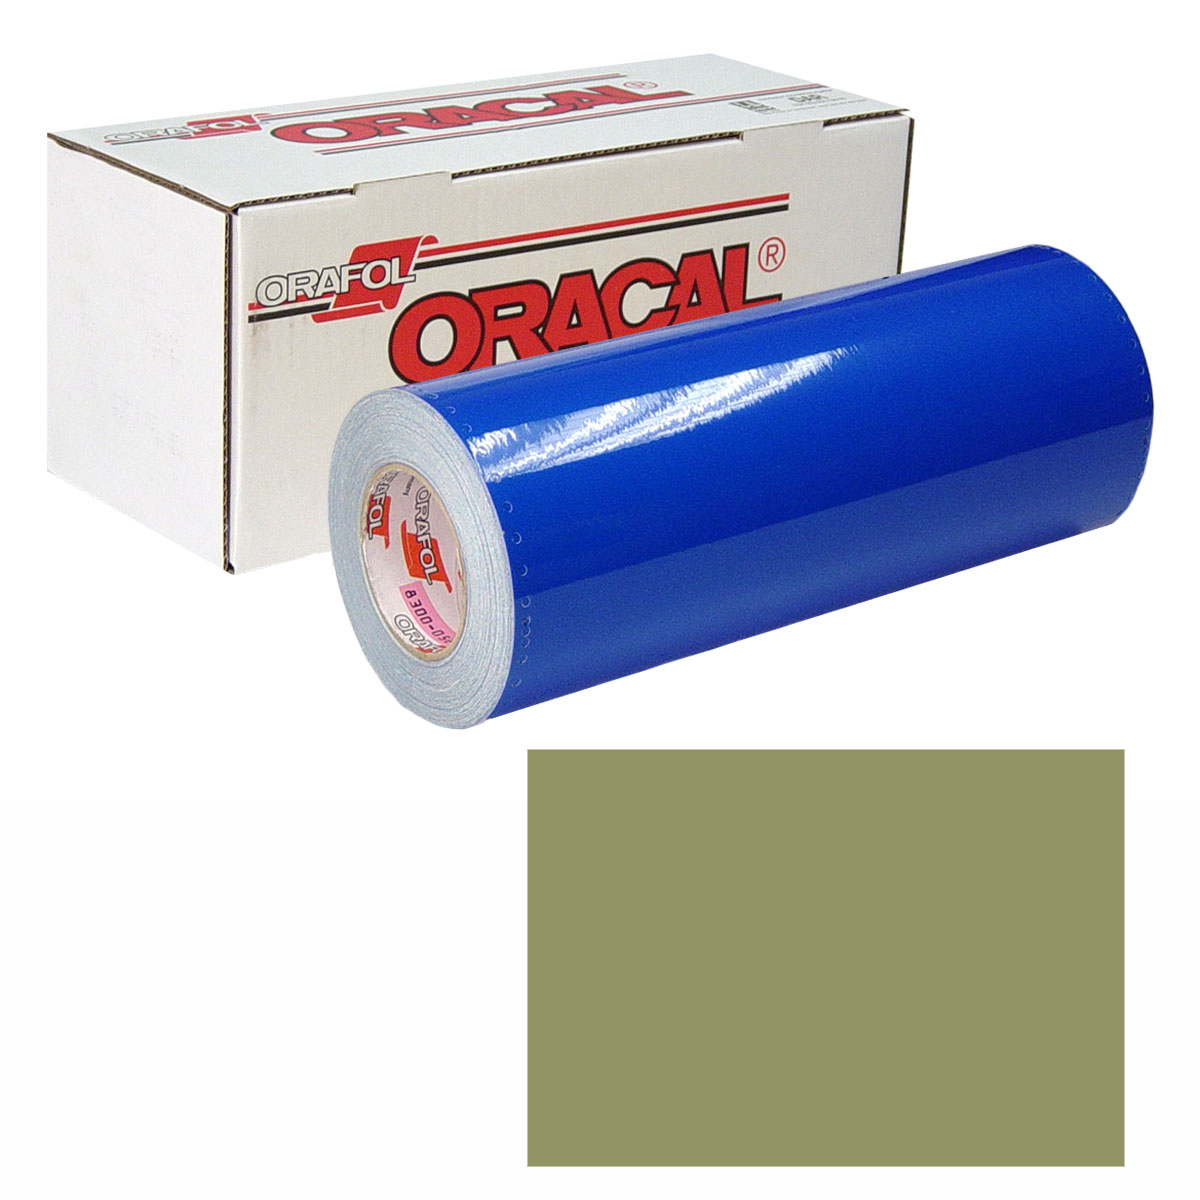 ORACAL 631 30in X 10yd 493 Olive